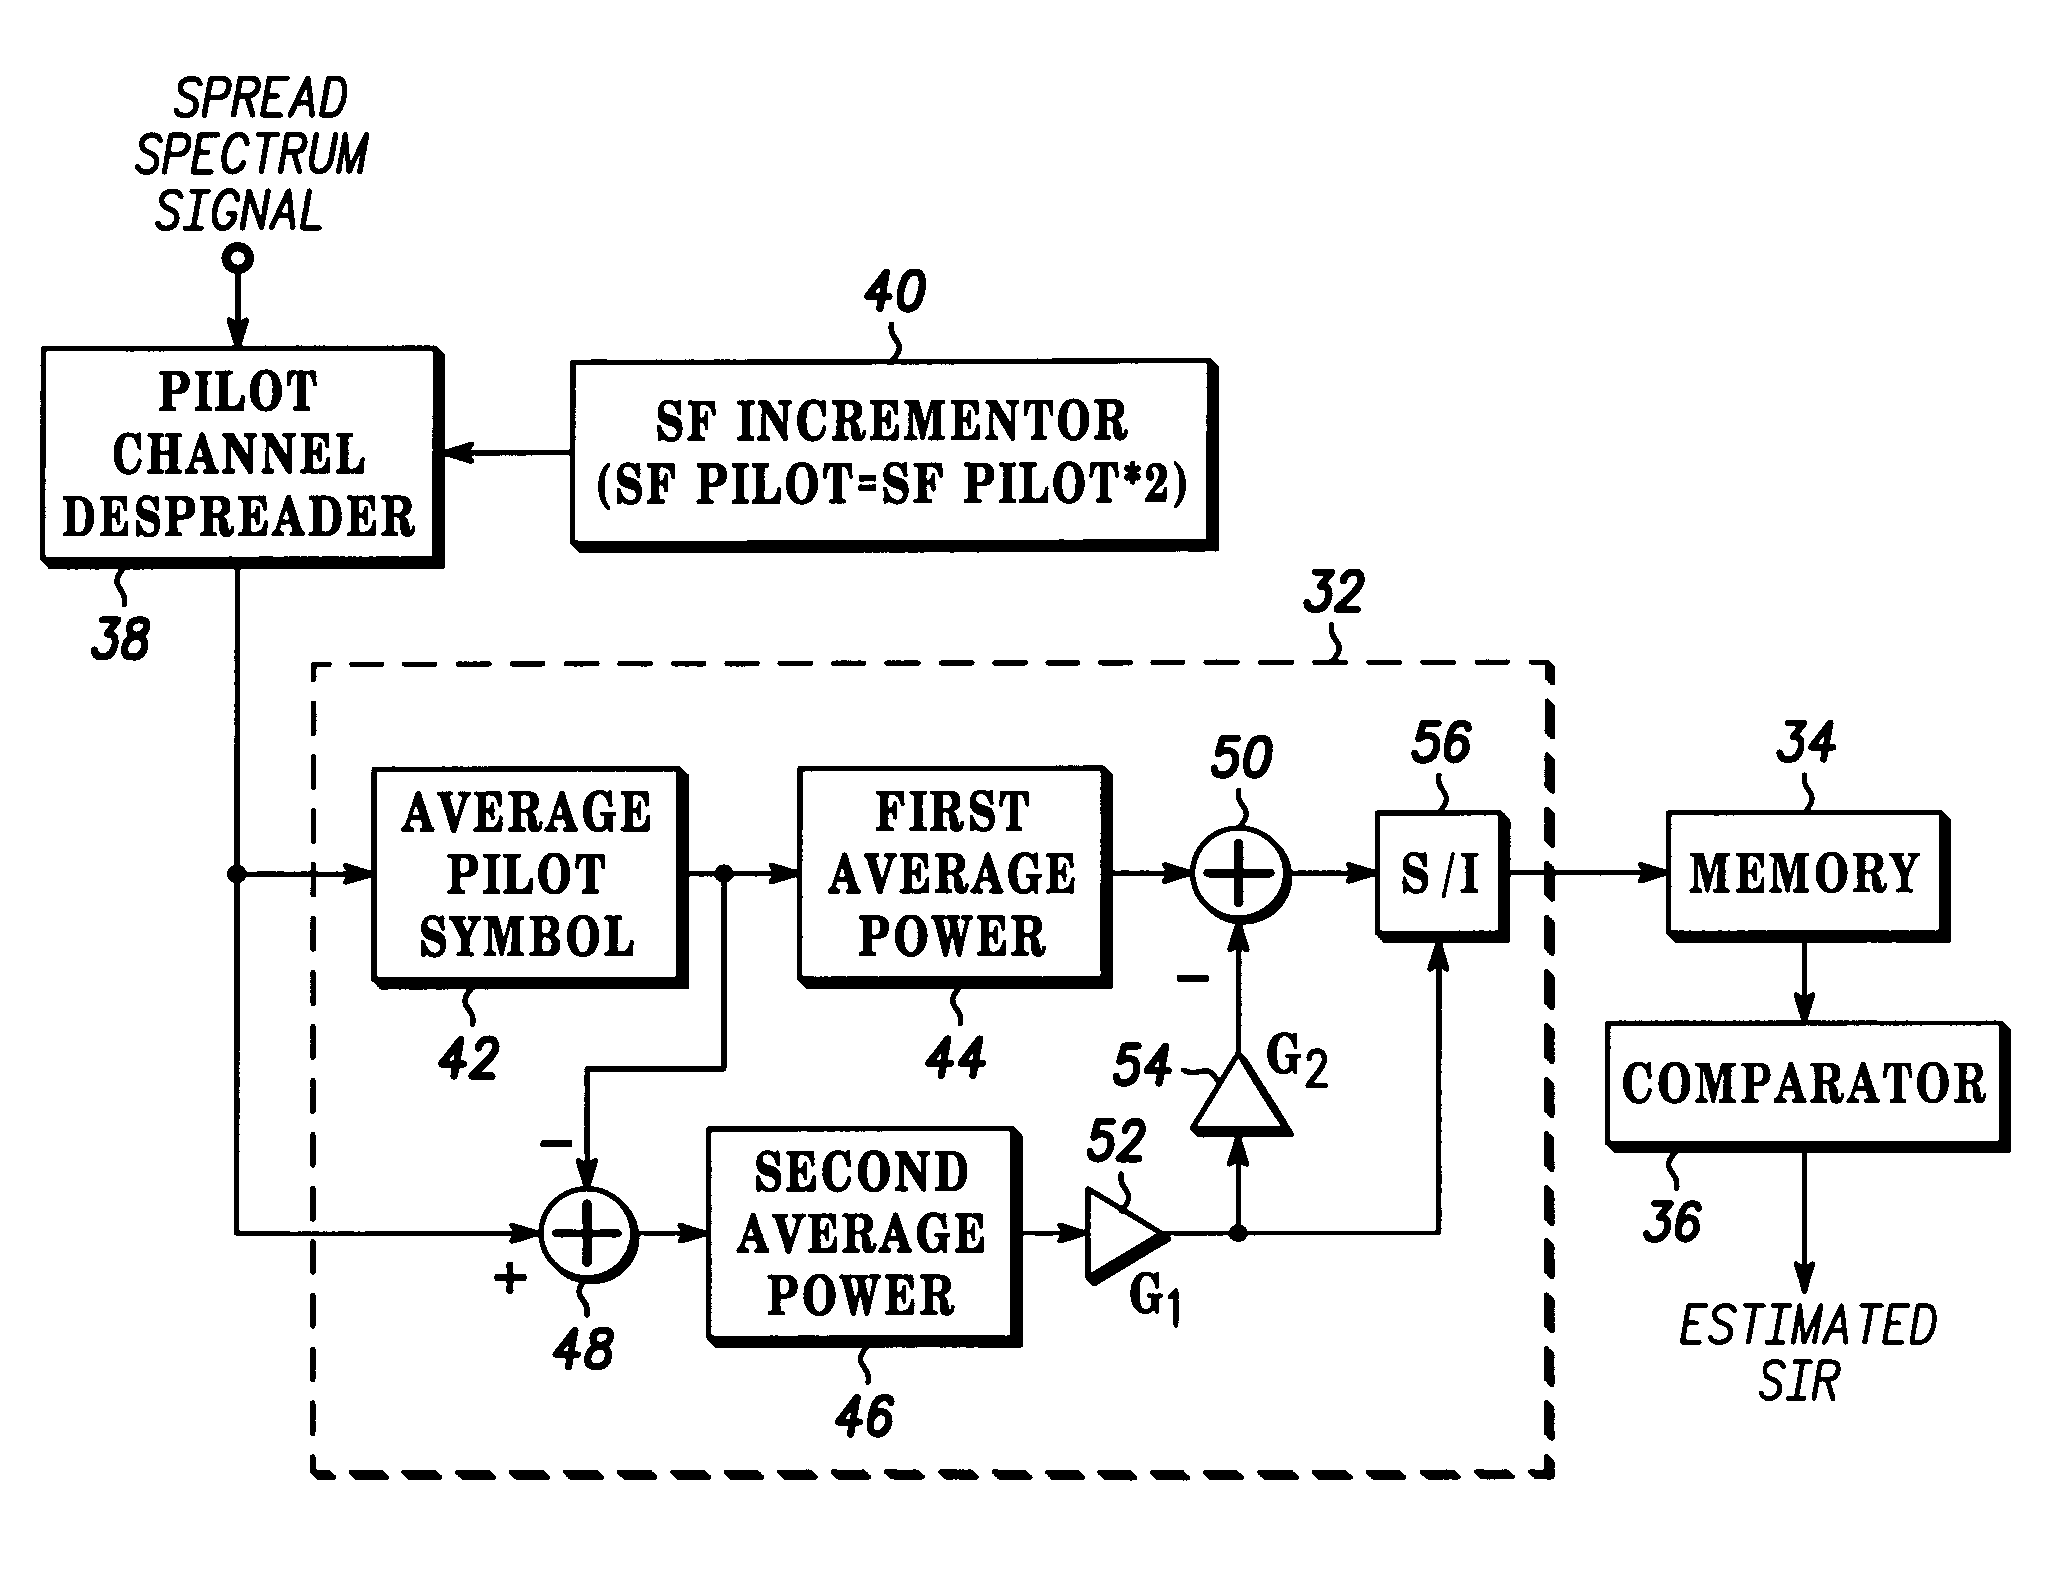 Method and apparatus for estimating a SIR of a pilot channel in a MC-CDMA system